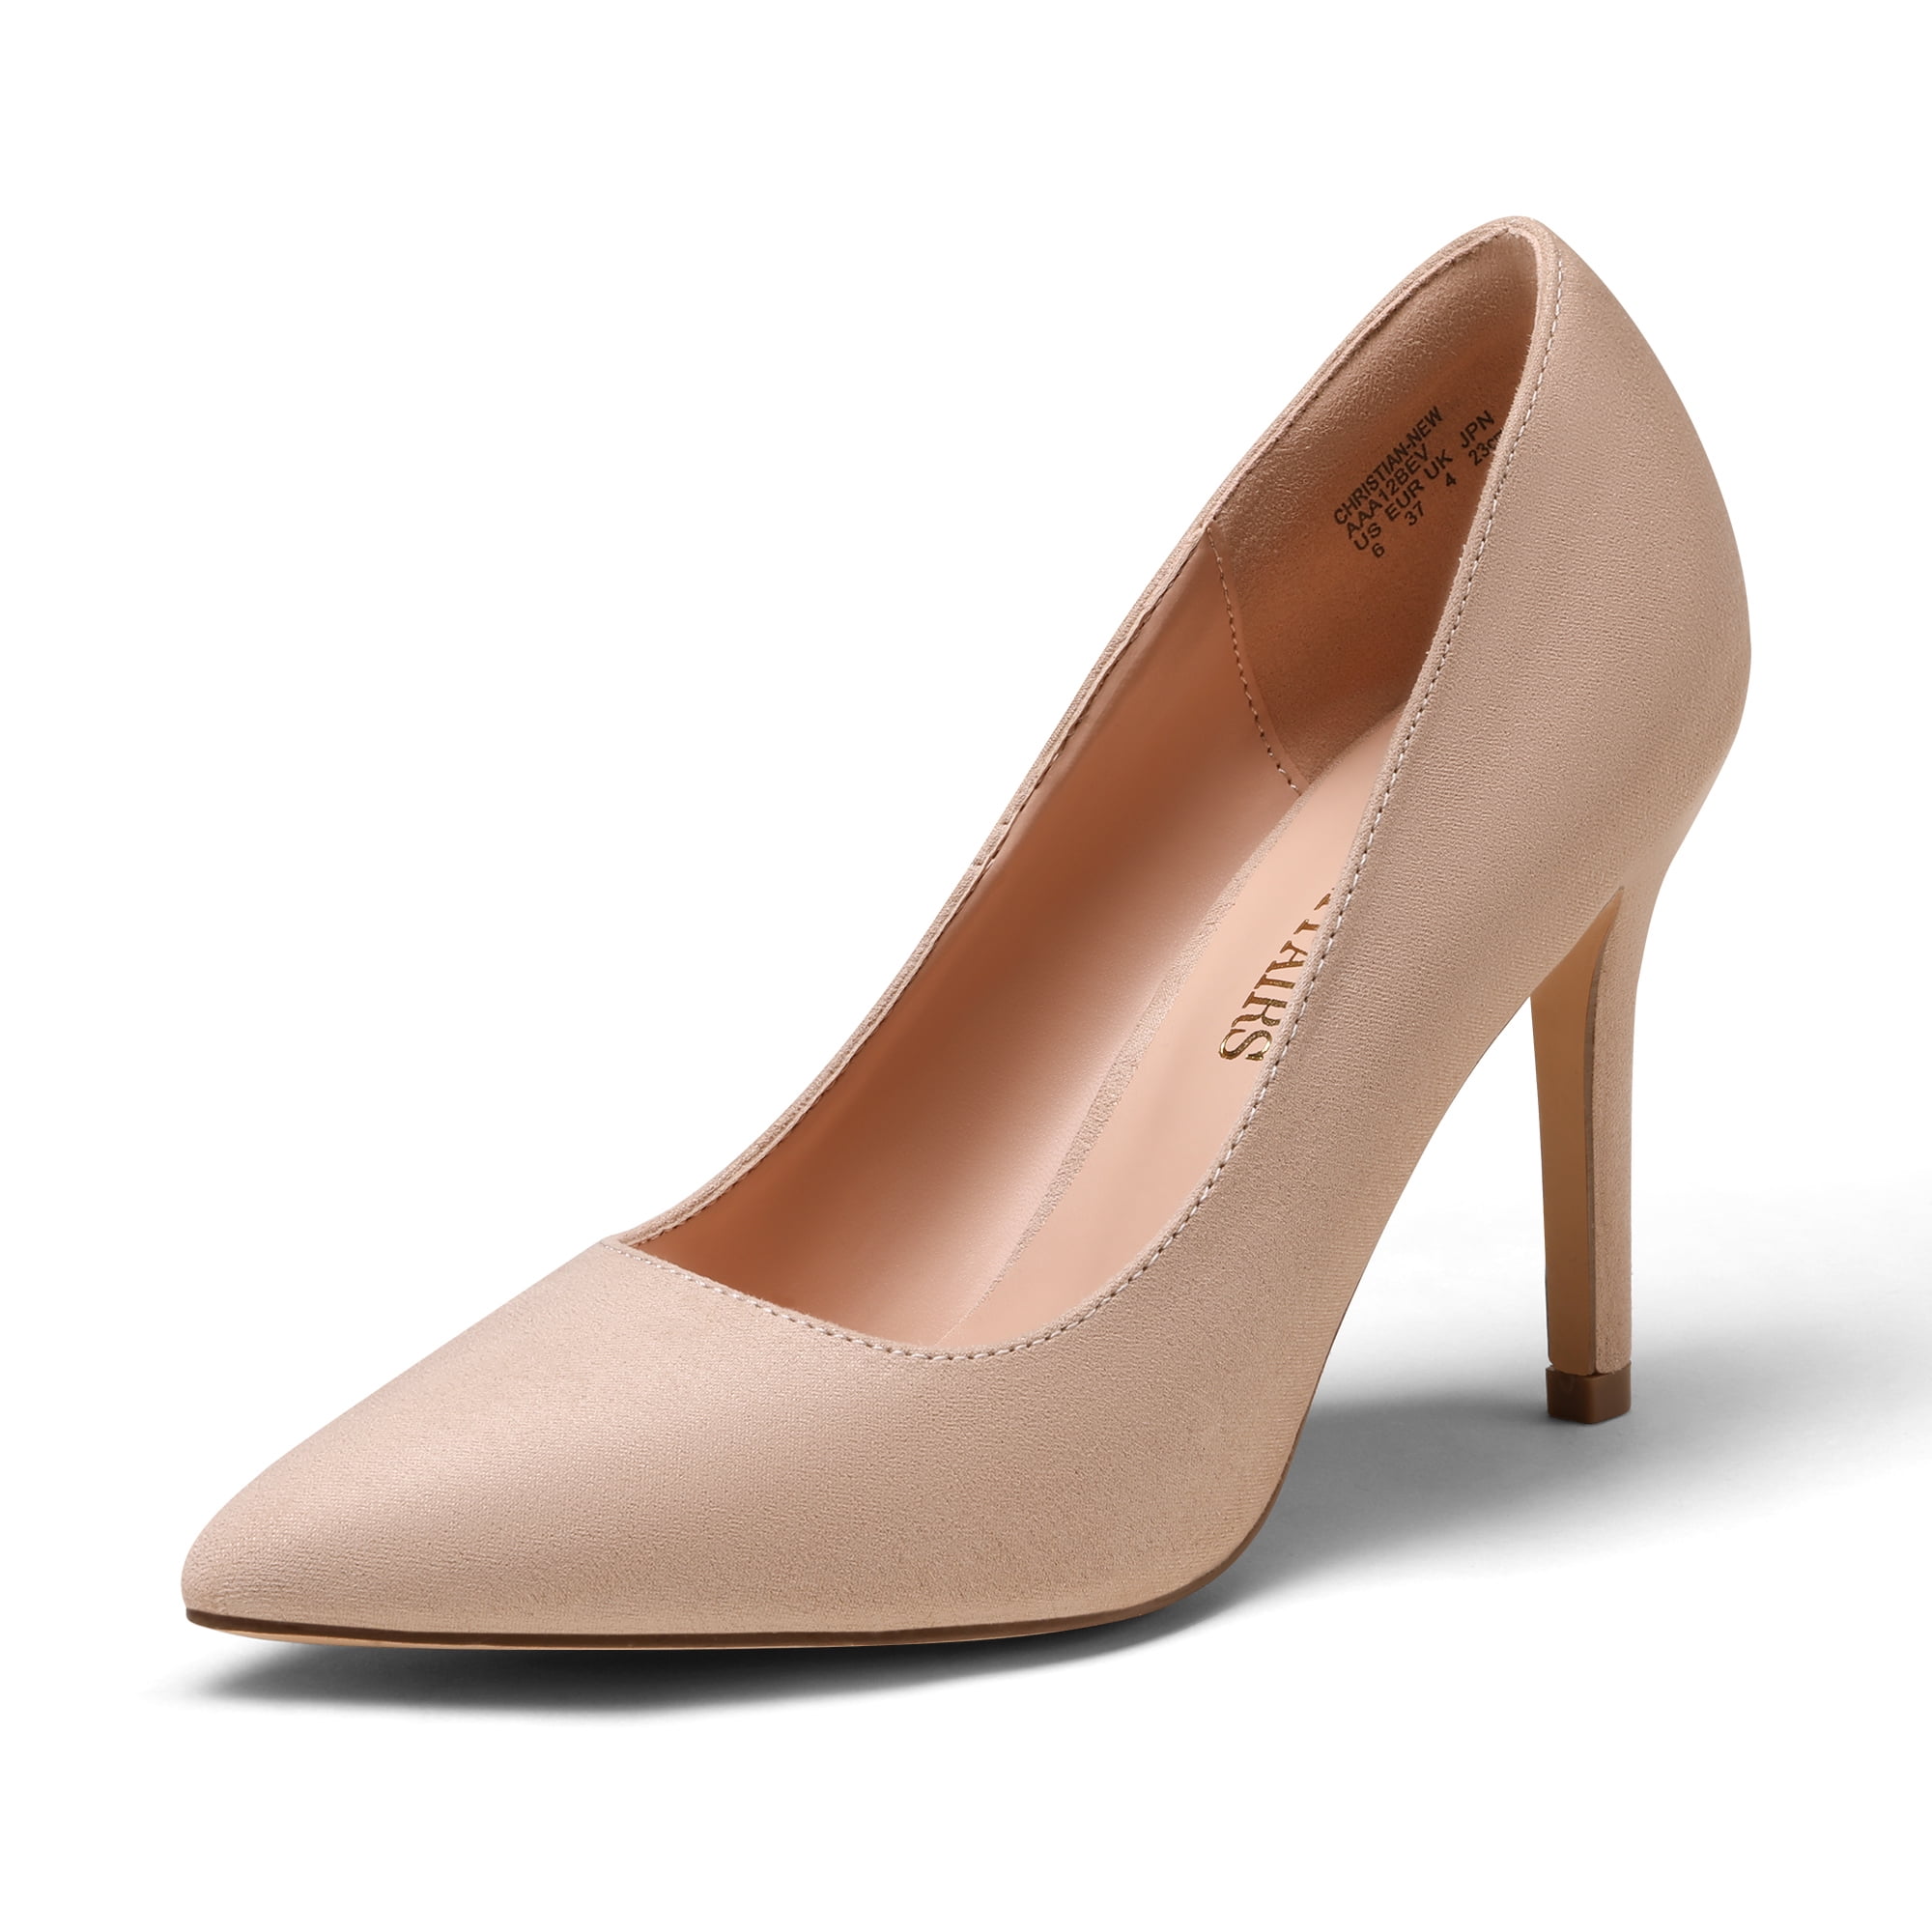 Stuart Weitzman sale: Save up to 70% with these exclusive SW Outlet deals